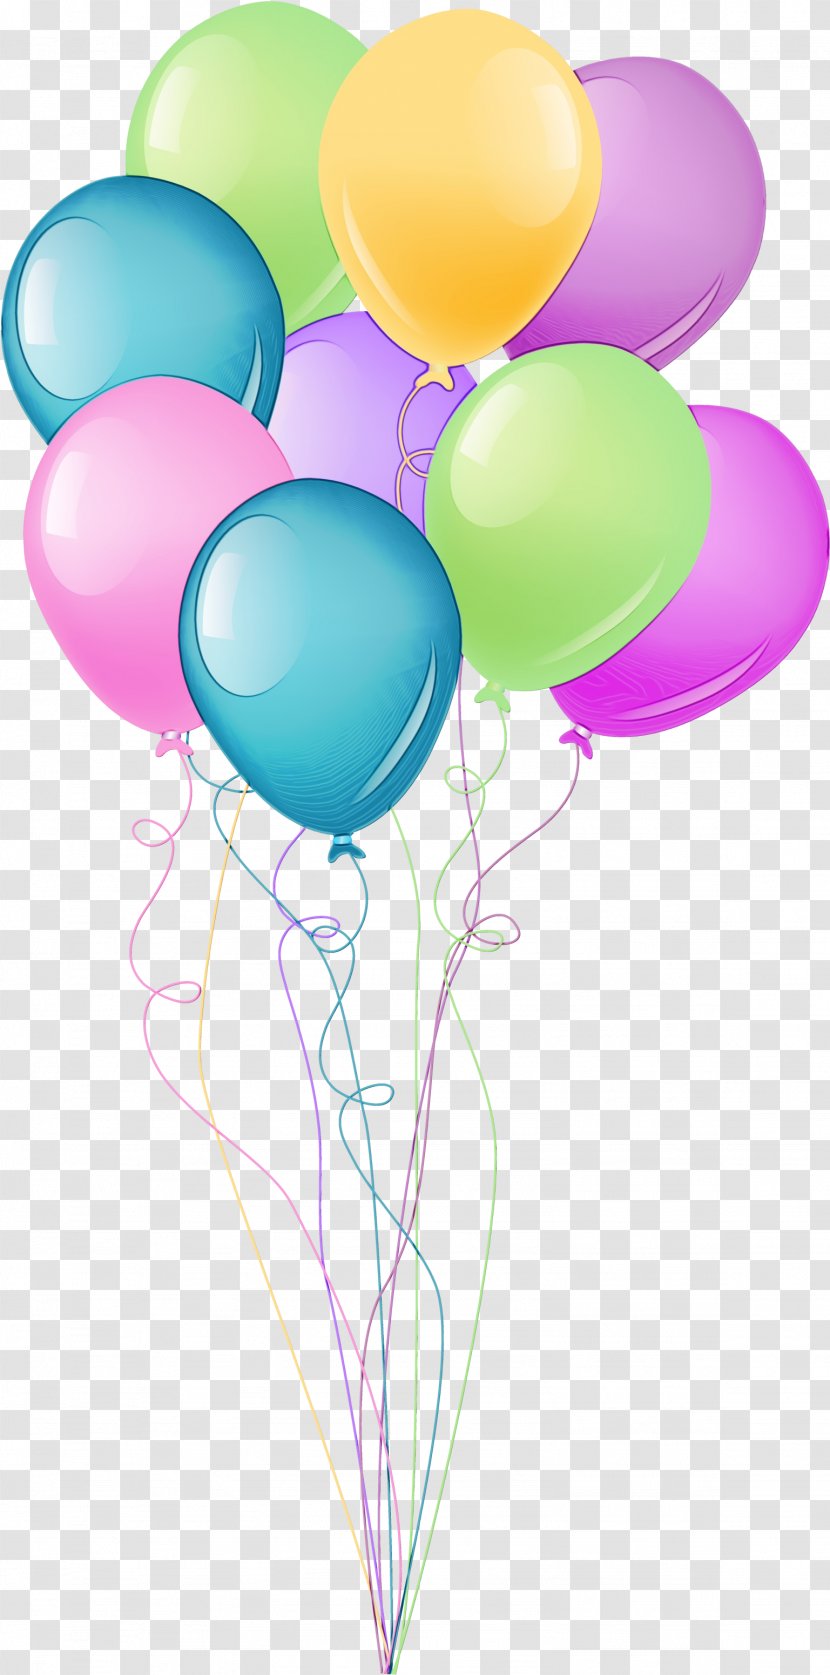 Birthday Party Background - Heartshaped Balloons - Heart Material Property Transparent PNG